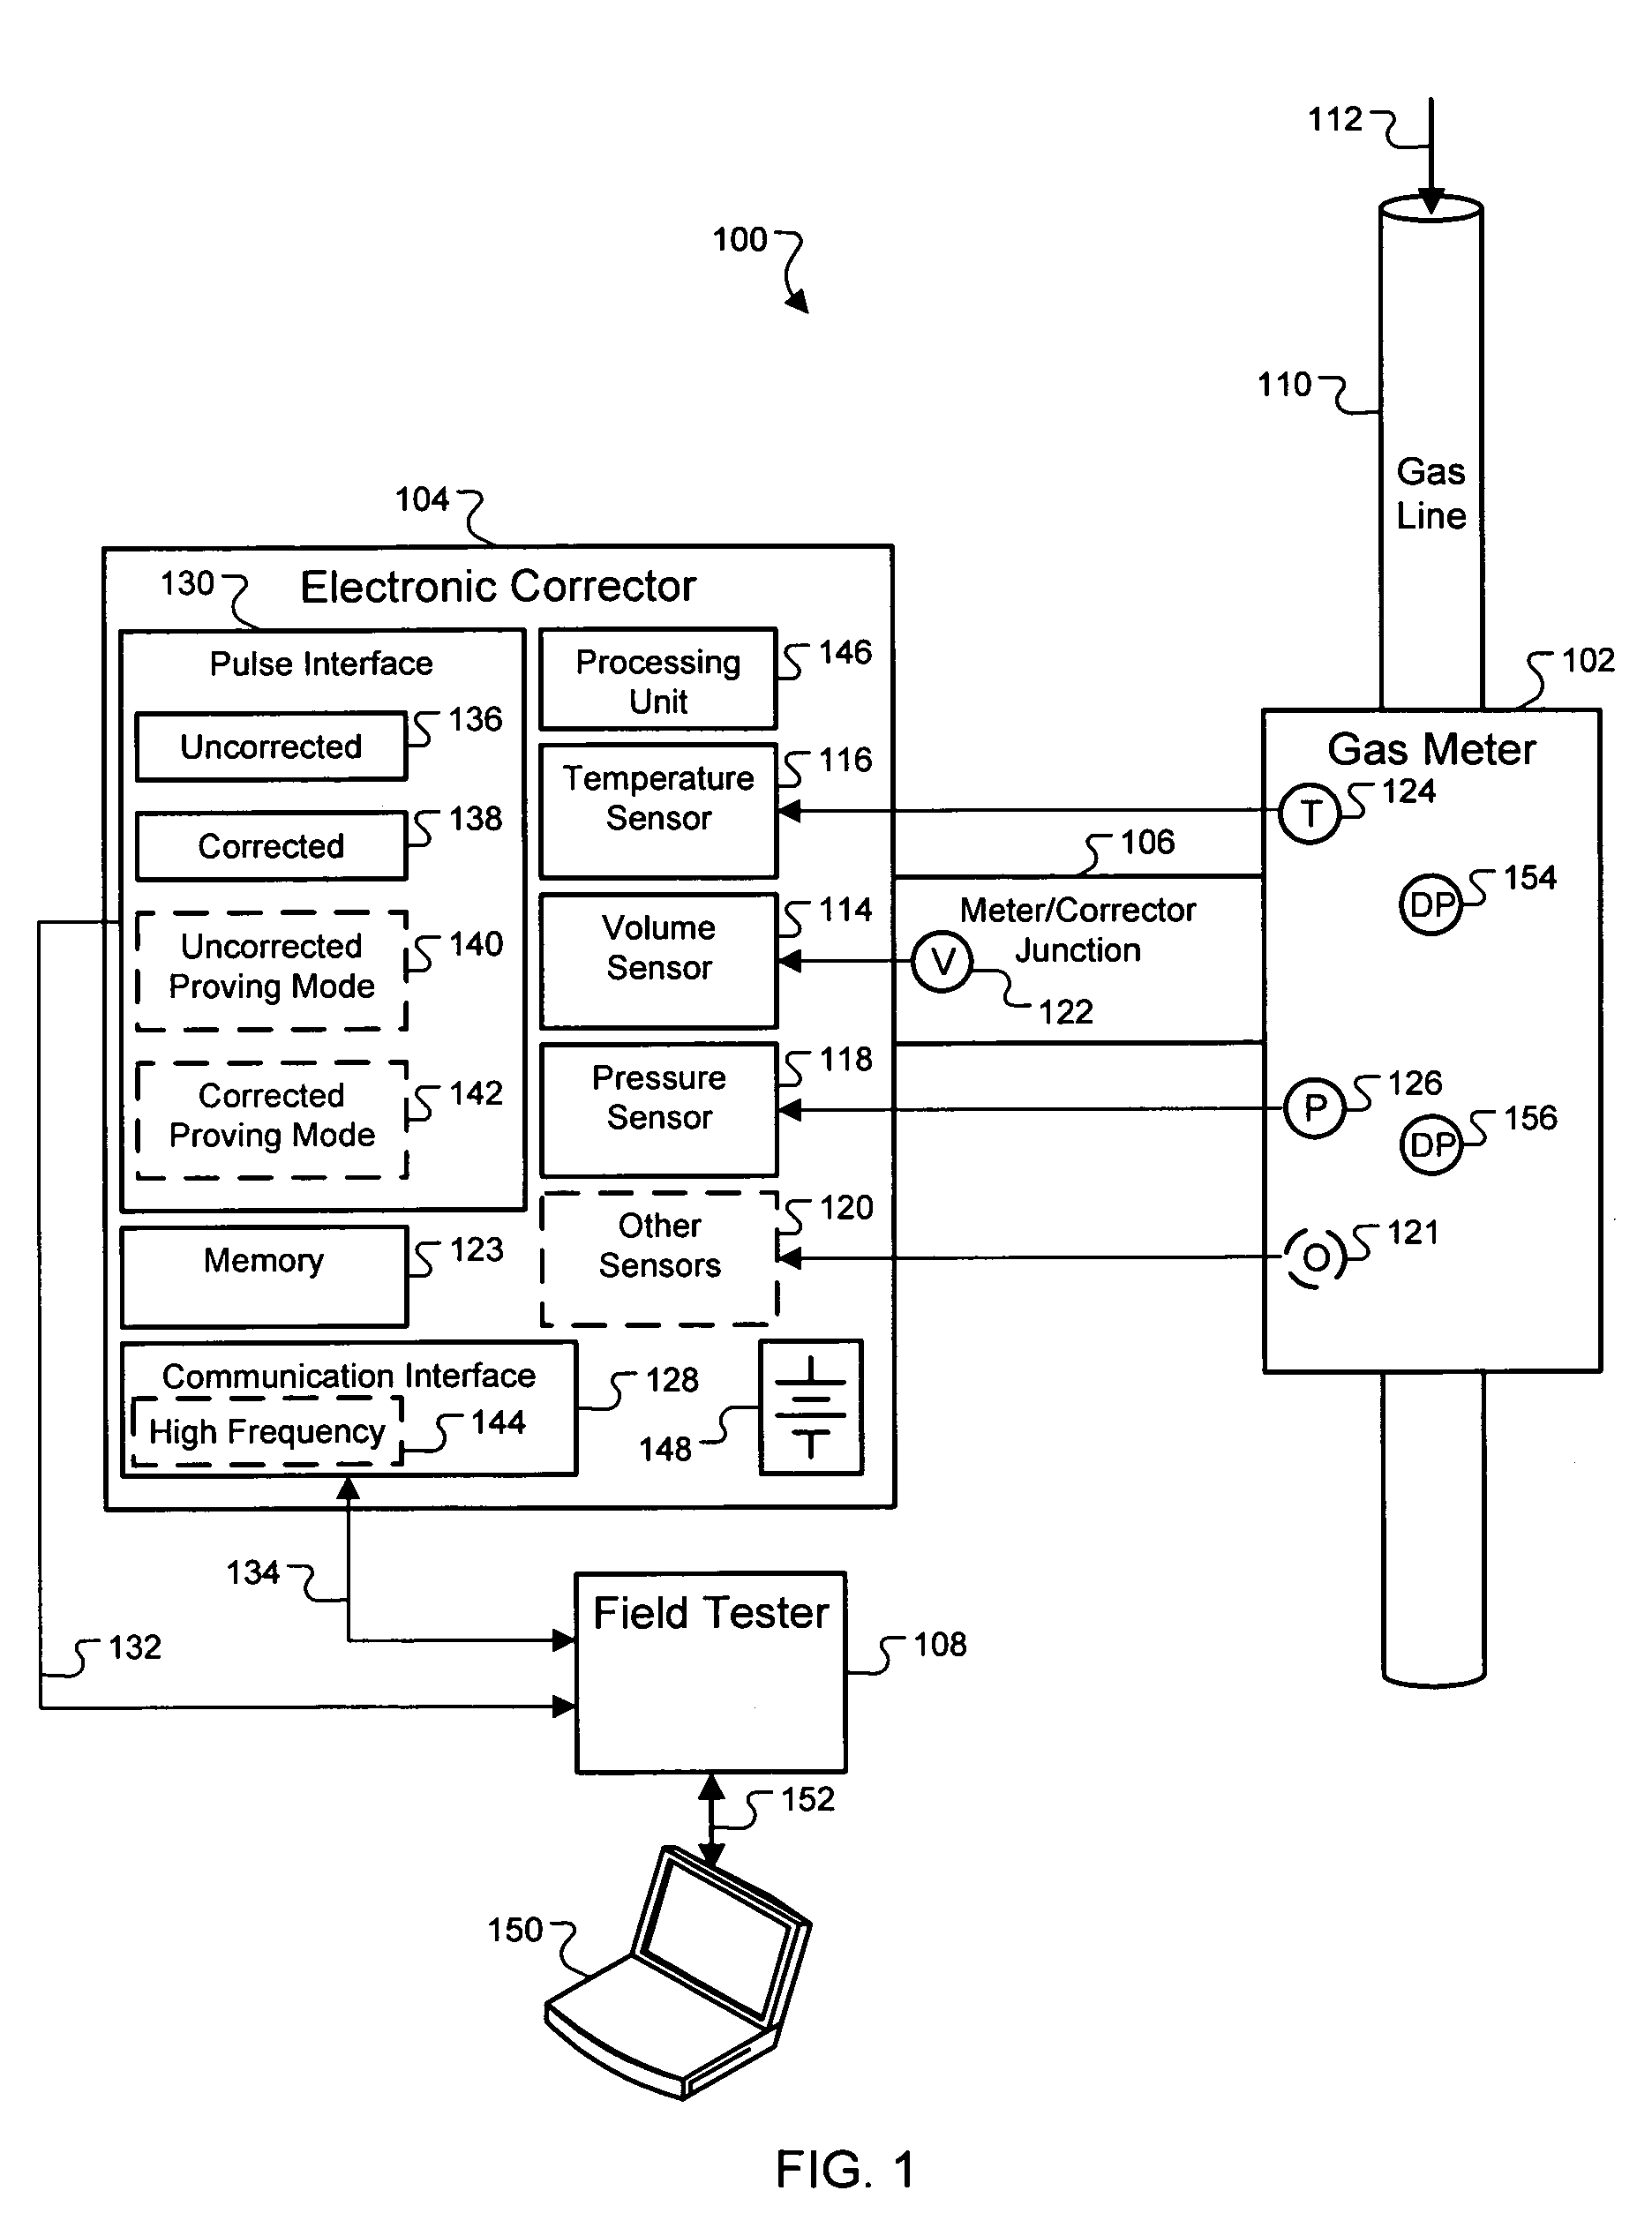 Portable diagnostic analysis of gas meter and electronic corrector